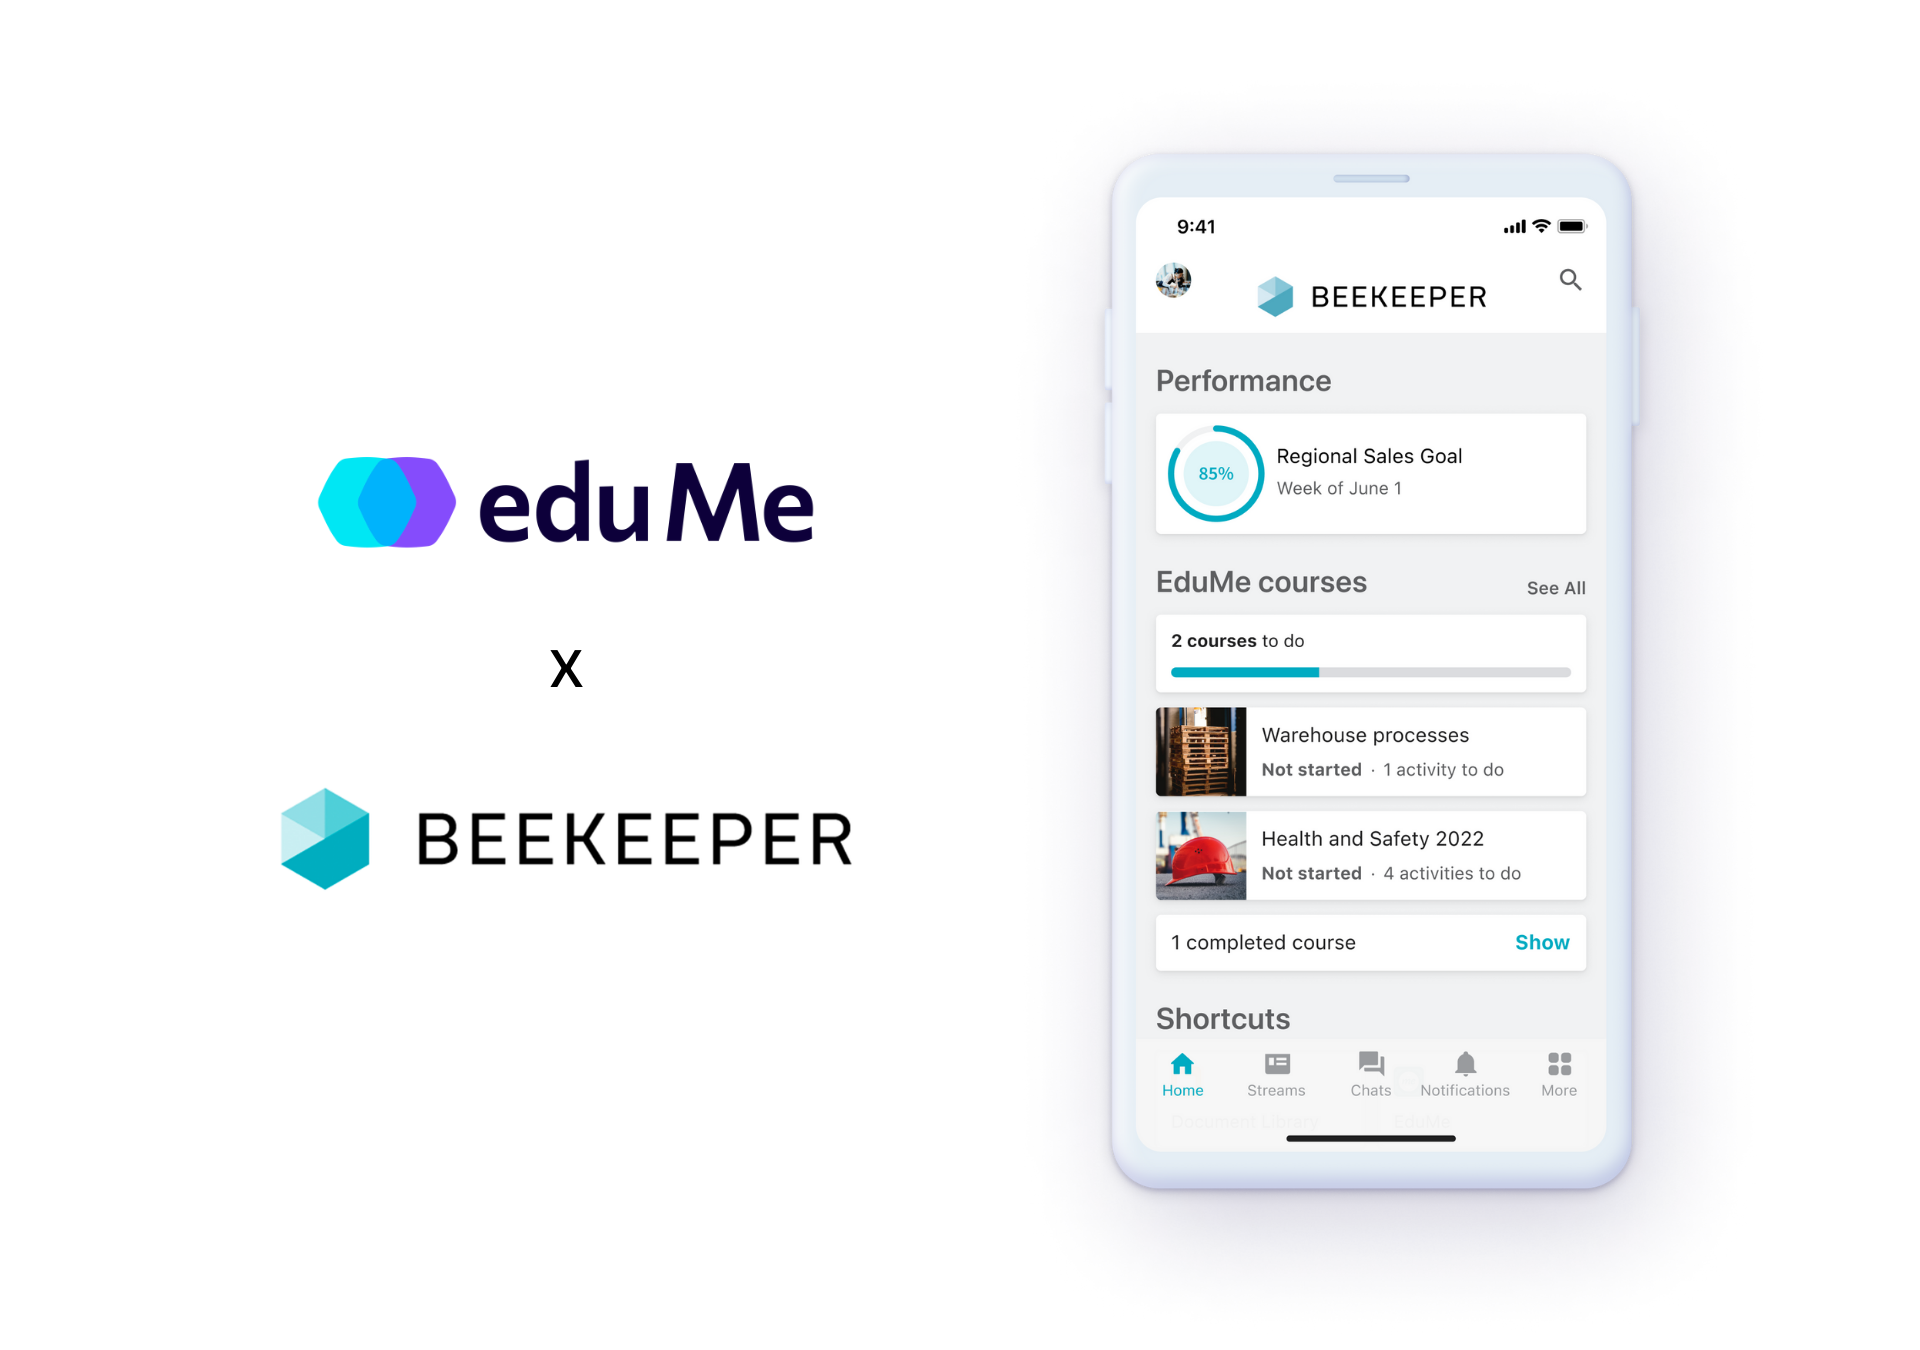 eduMe's Beekeeper integration, enabling learning within the flow of deskless work